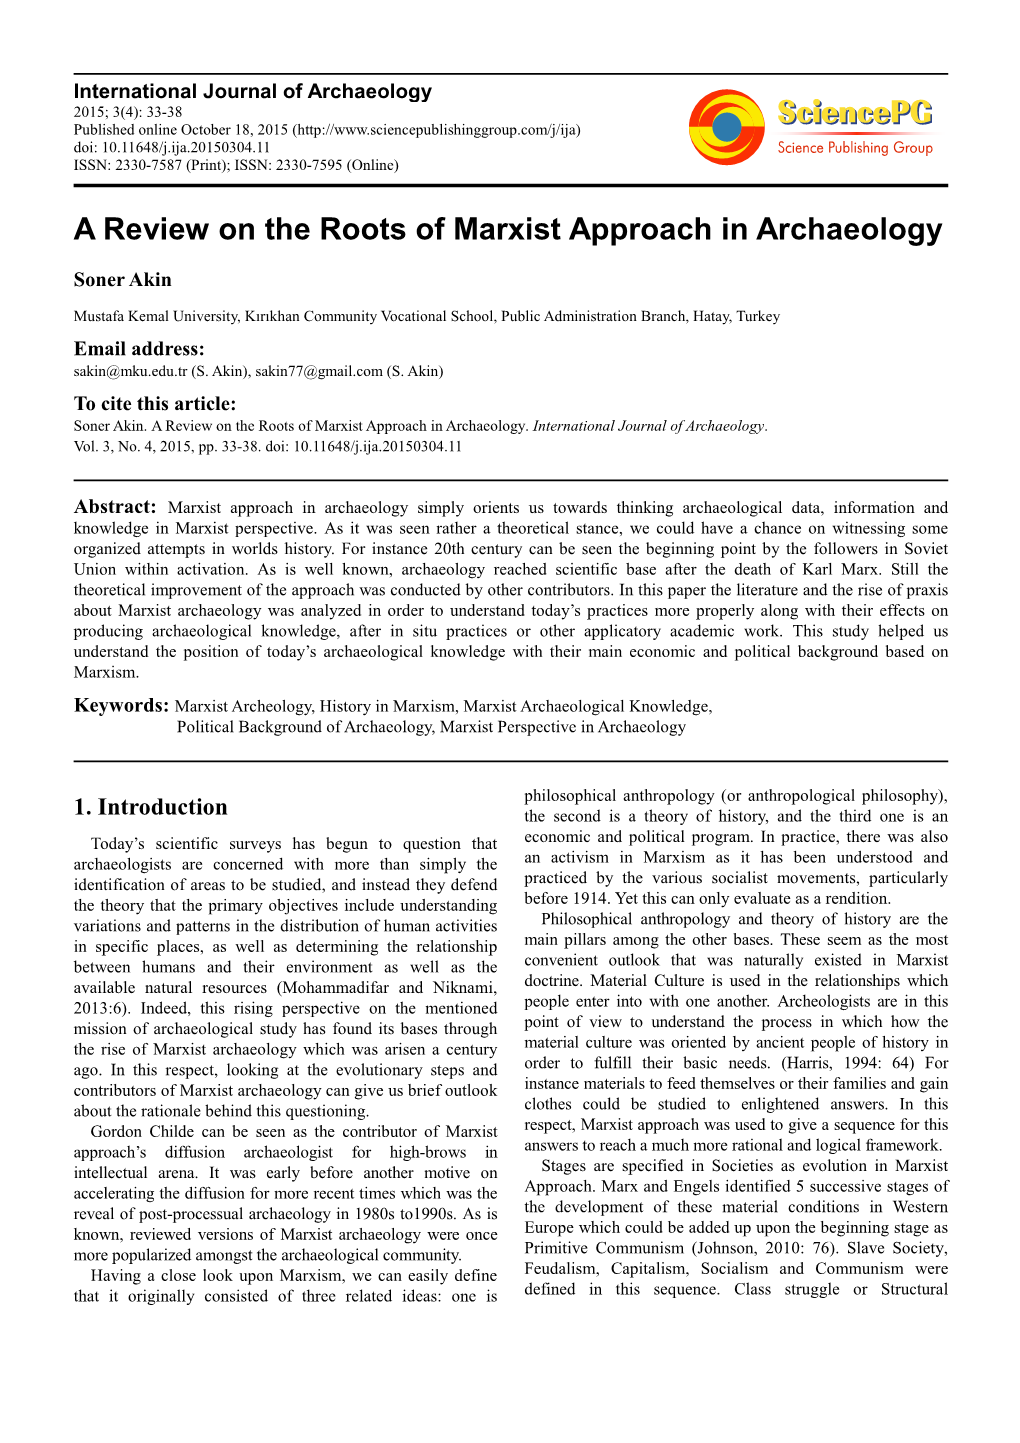 A Review on the Roots of Marxist Approach in Archaeology